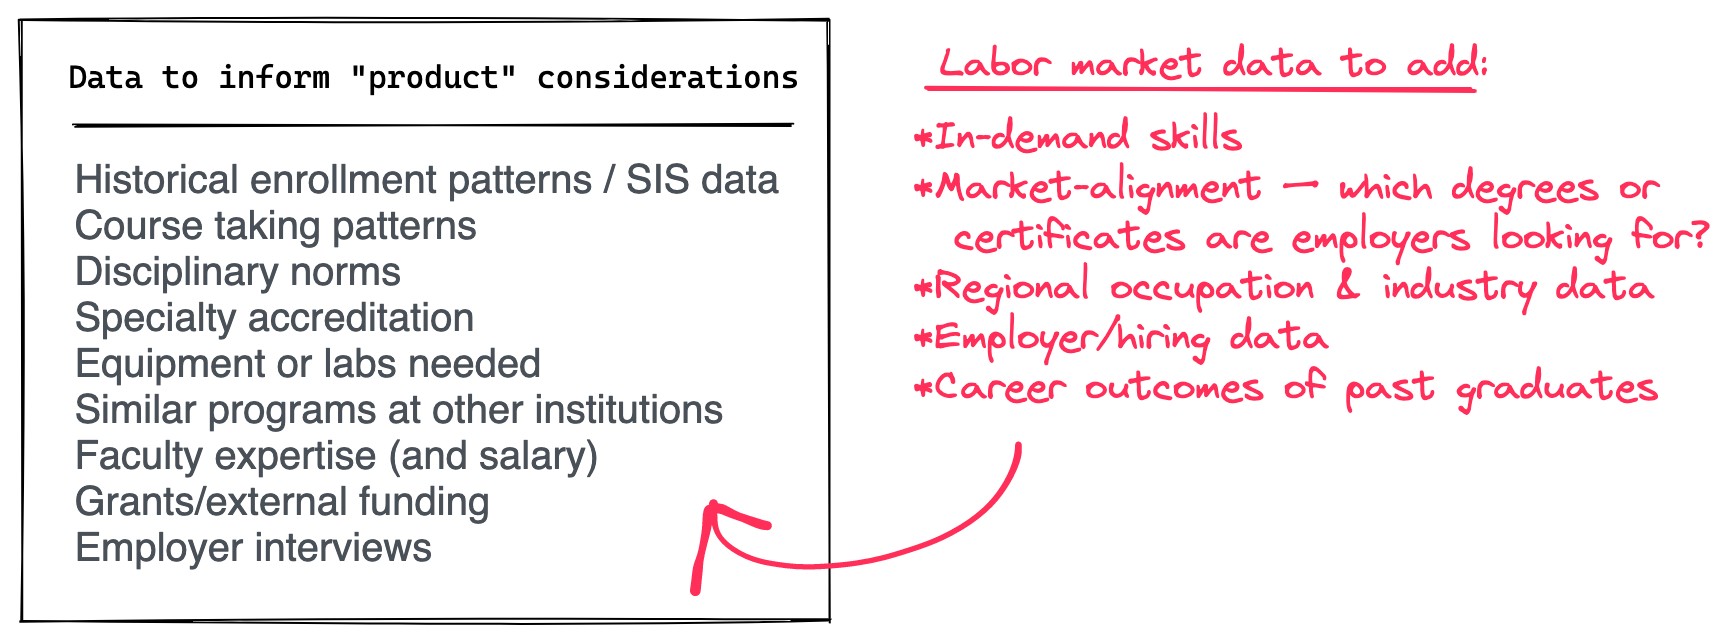 Data that can inform higher education "product" considerations — and what labor market data to add